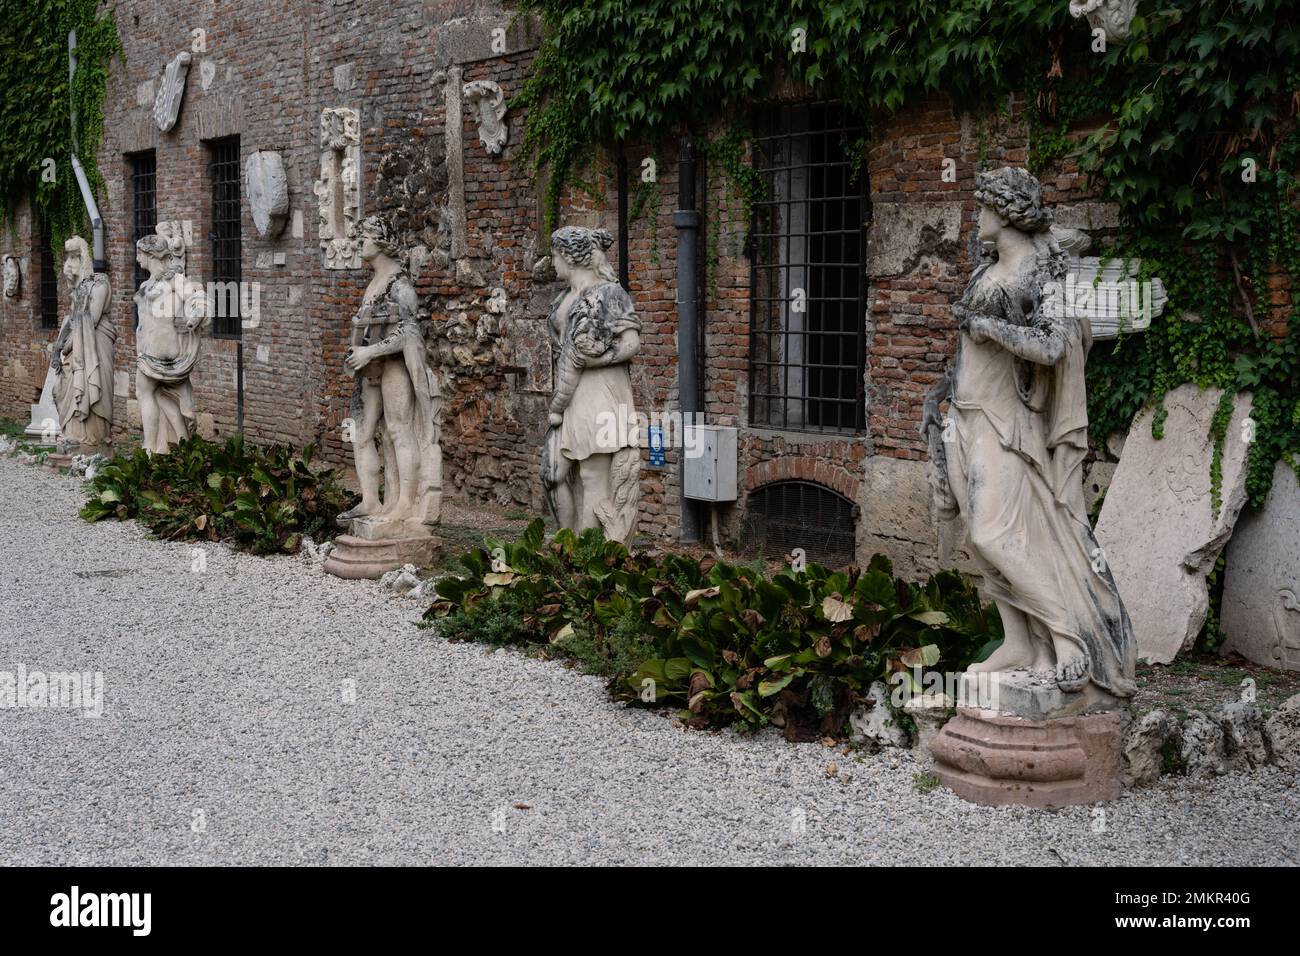 Statues of Muses in the Courtyard Garden of the Olympic Theater or Teatro Olimpico in Vicenza, Italy Stock Photo